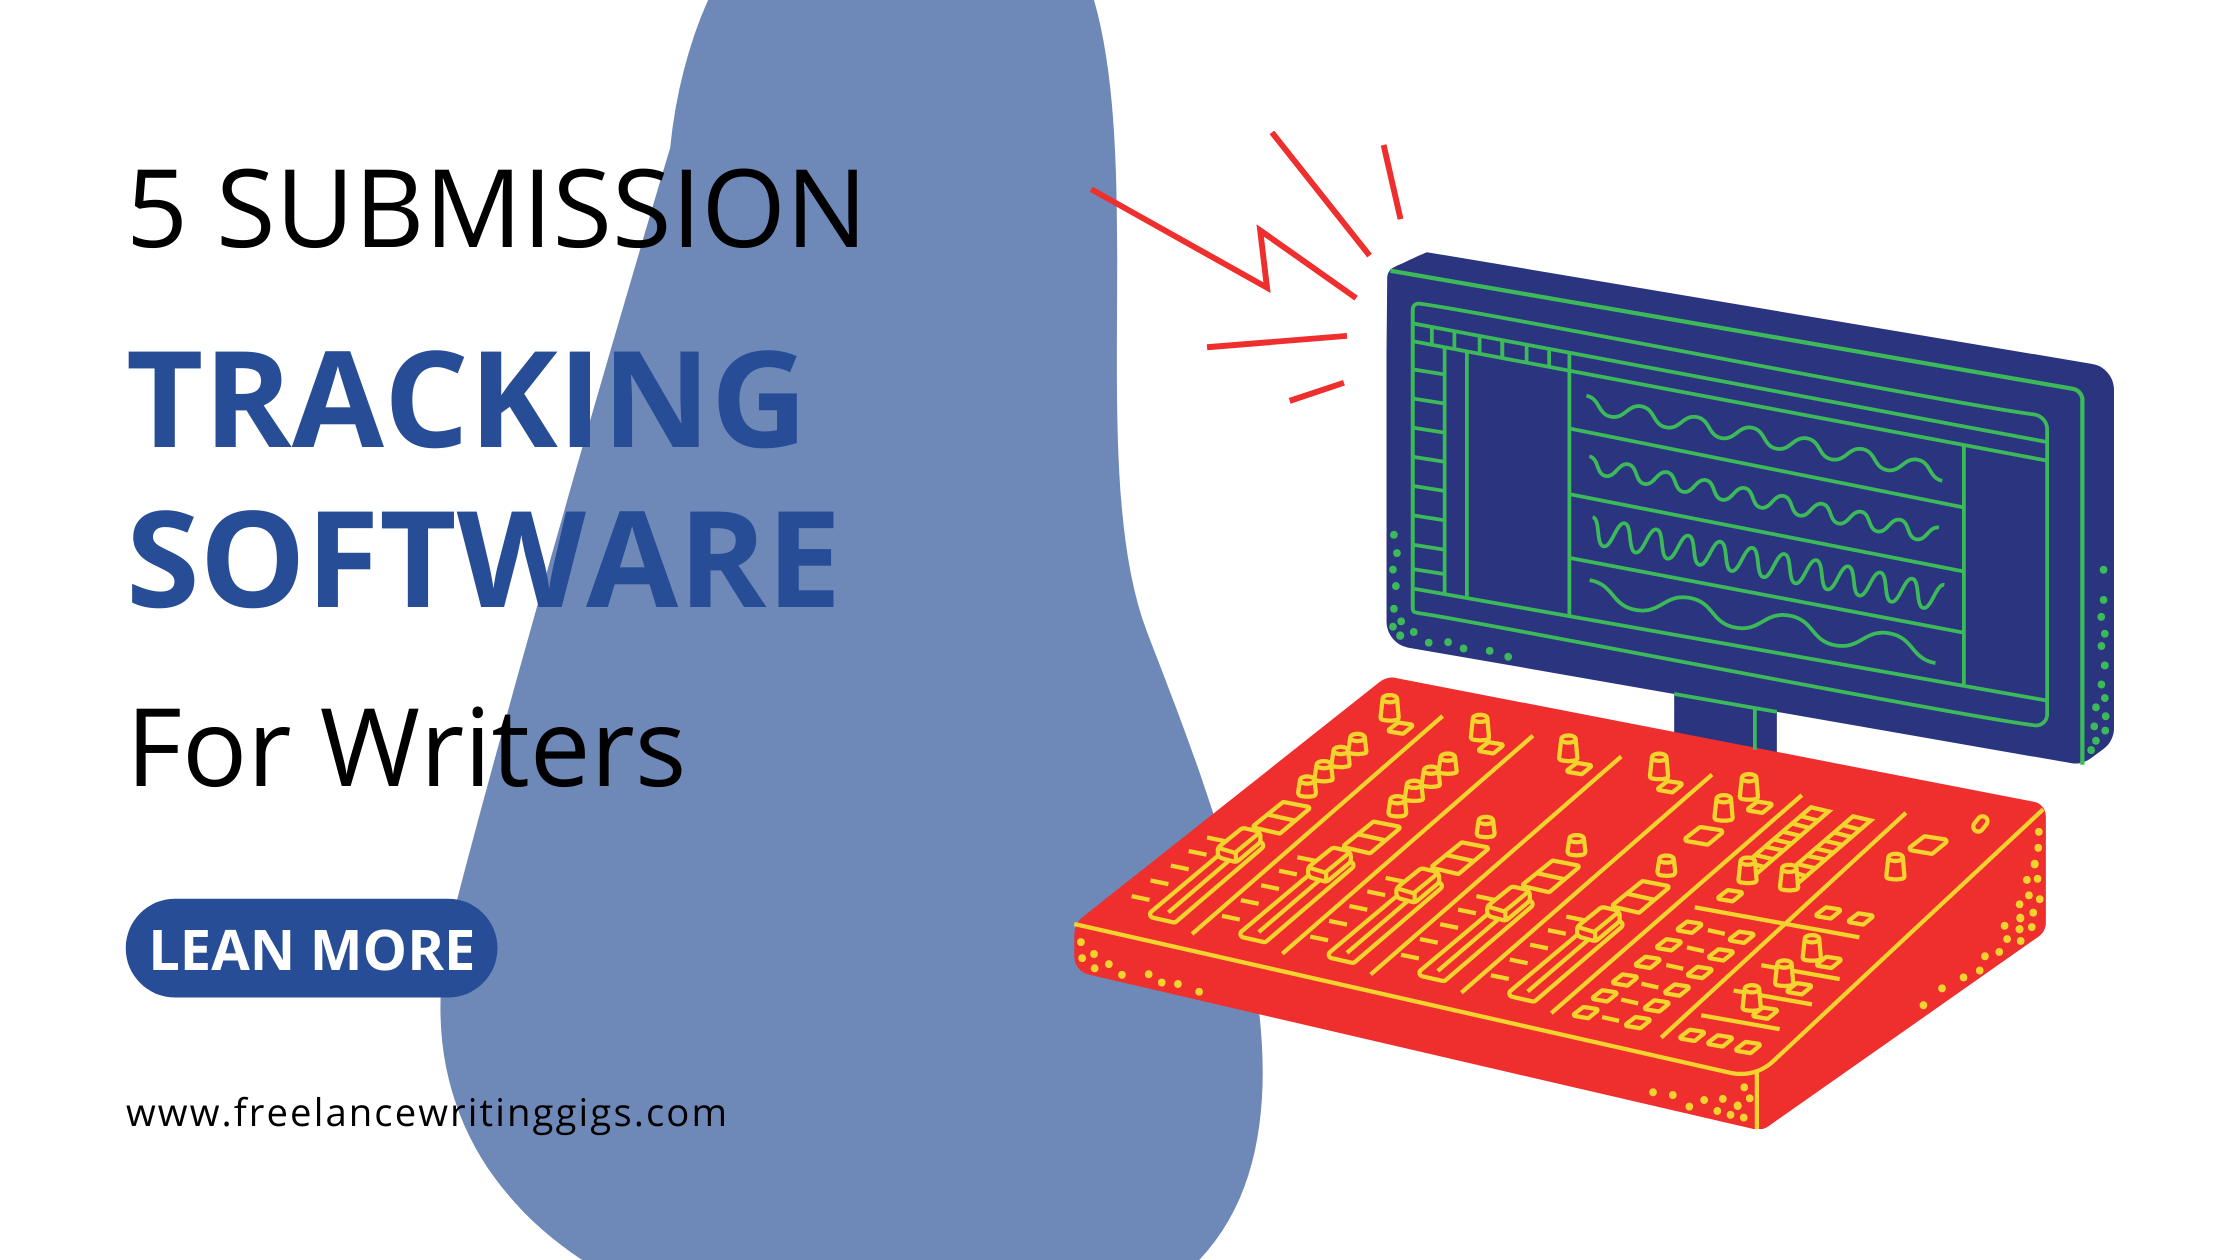 5 Submission Tracking Software Resources for Writers